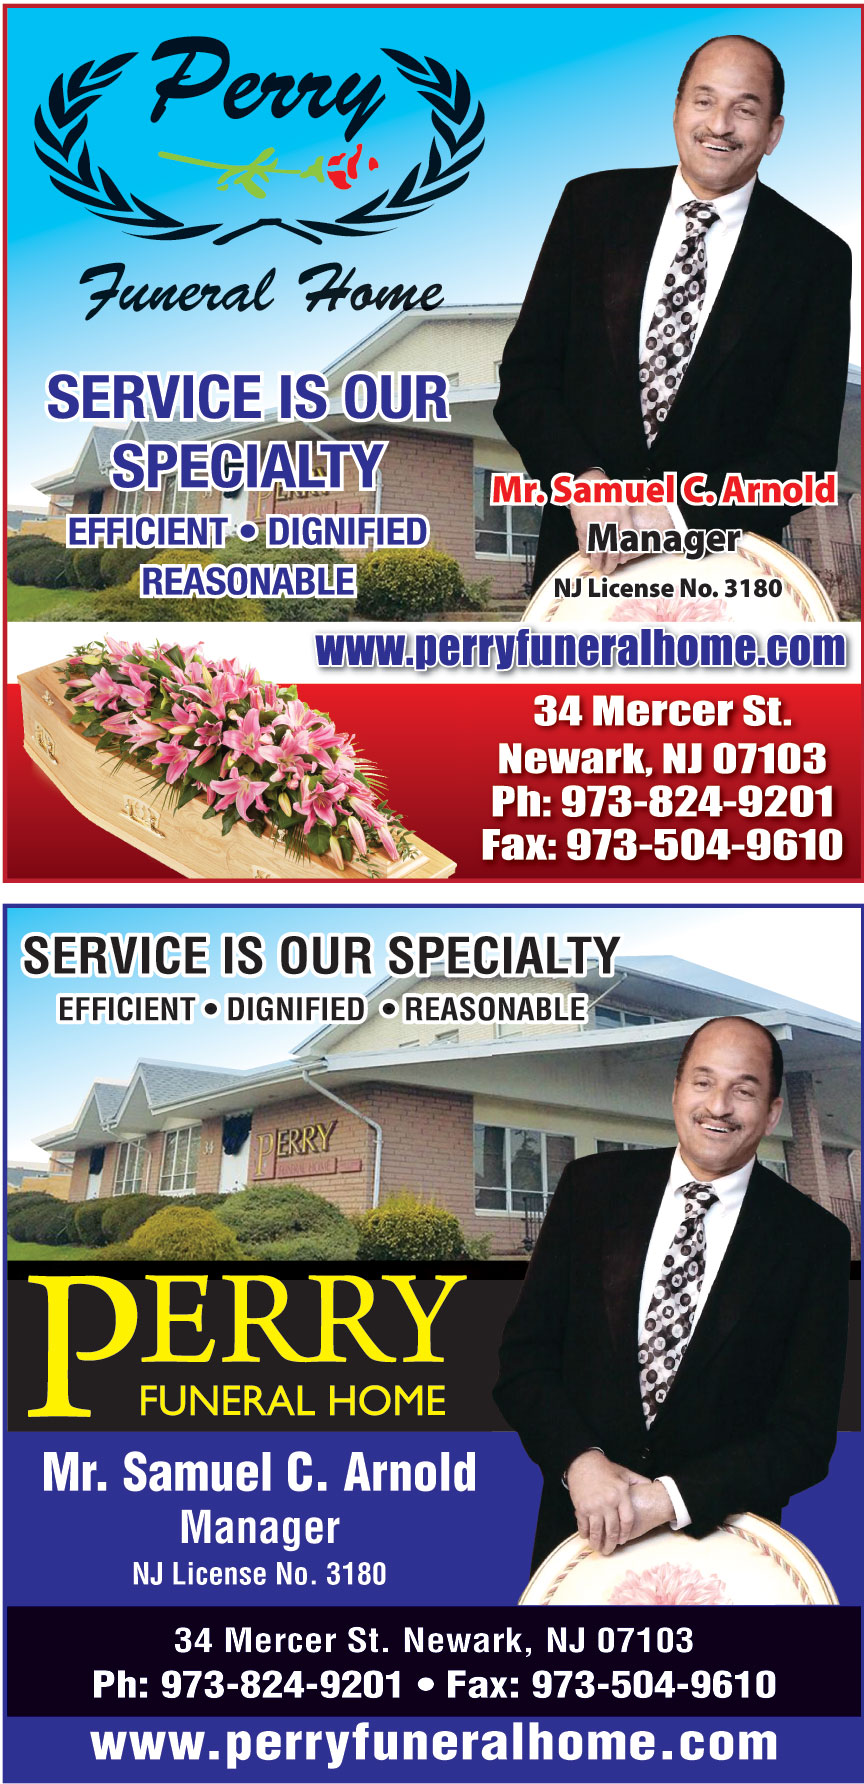 PERRY FUNERAL SERVICE